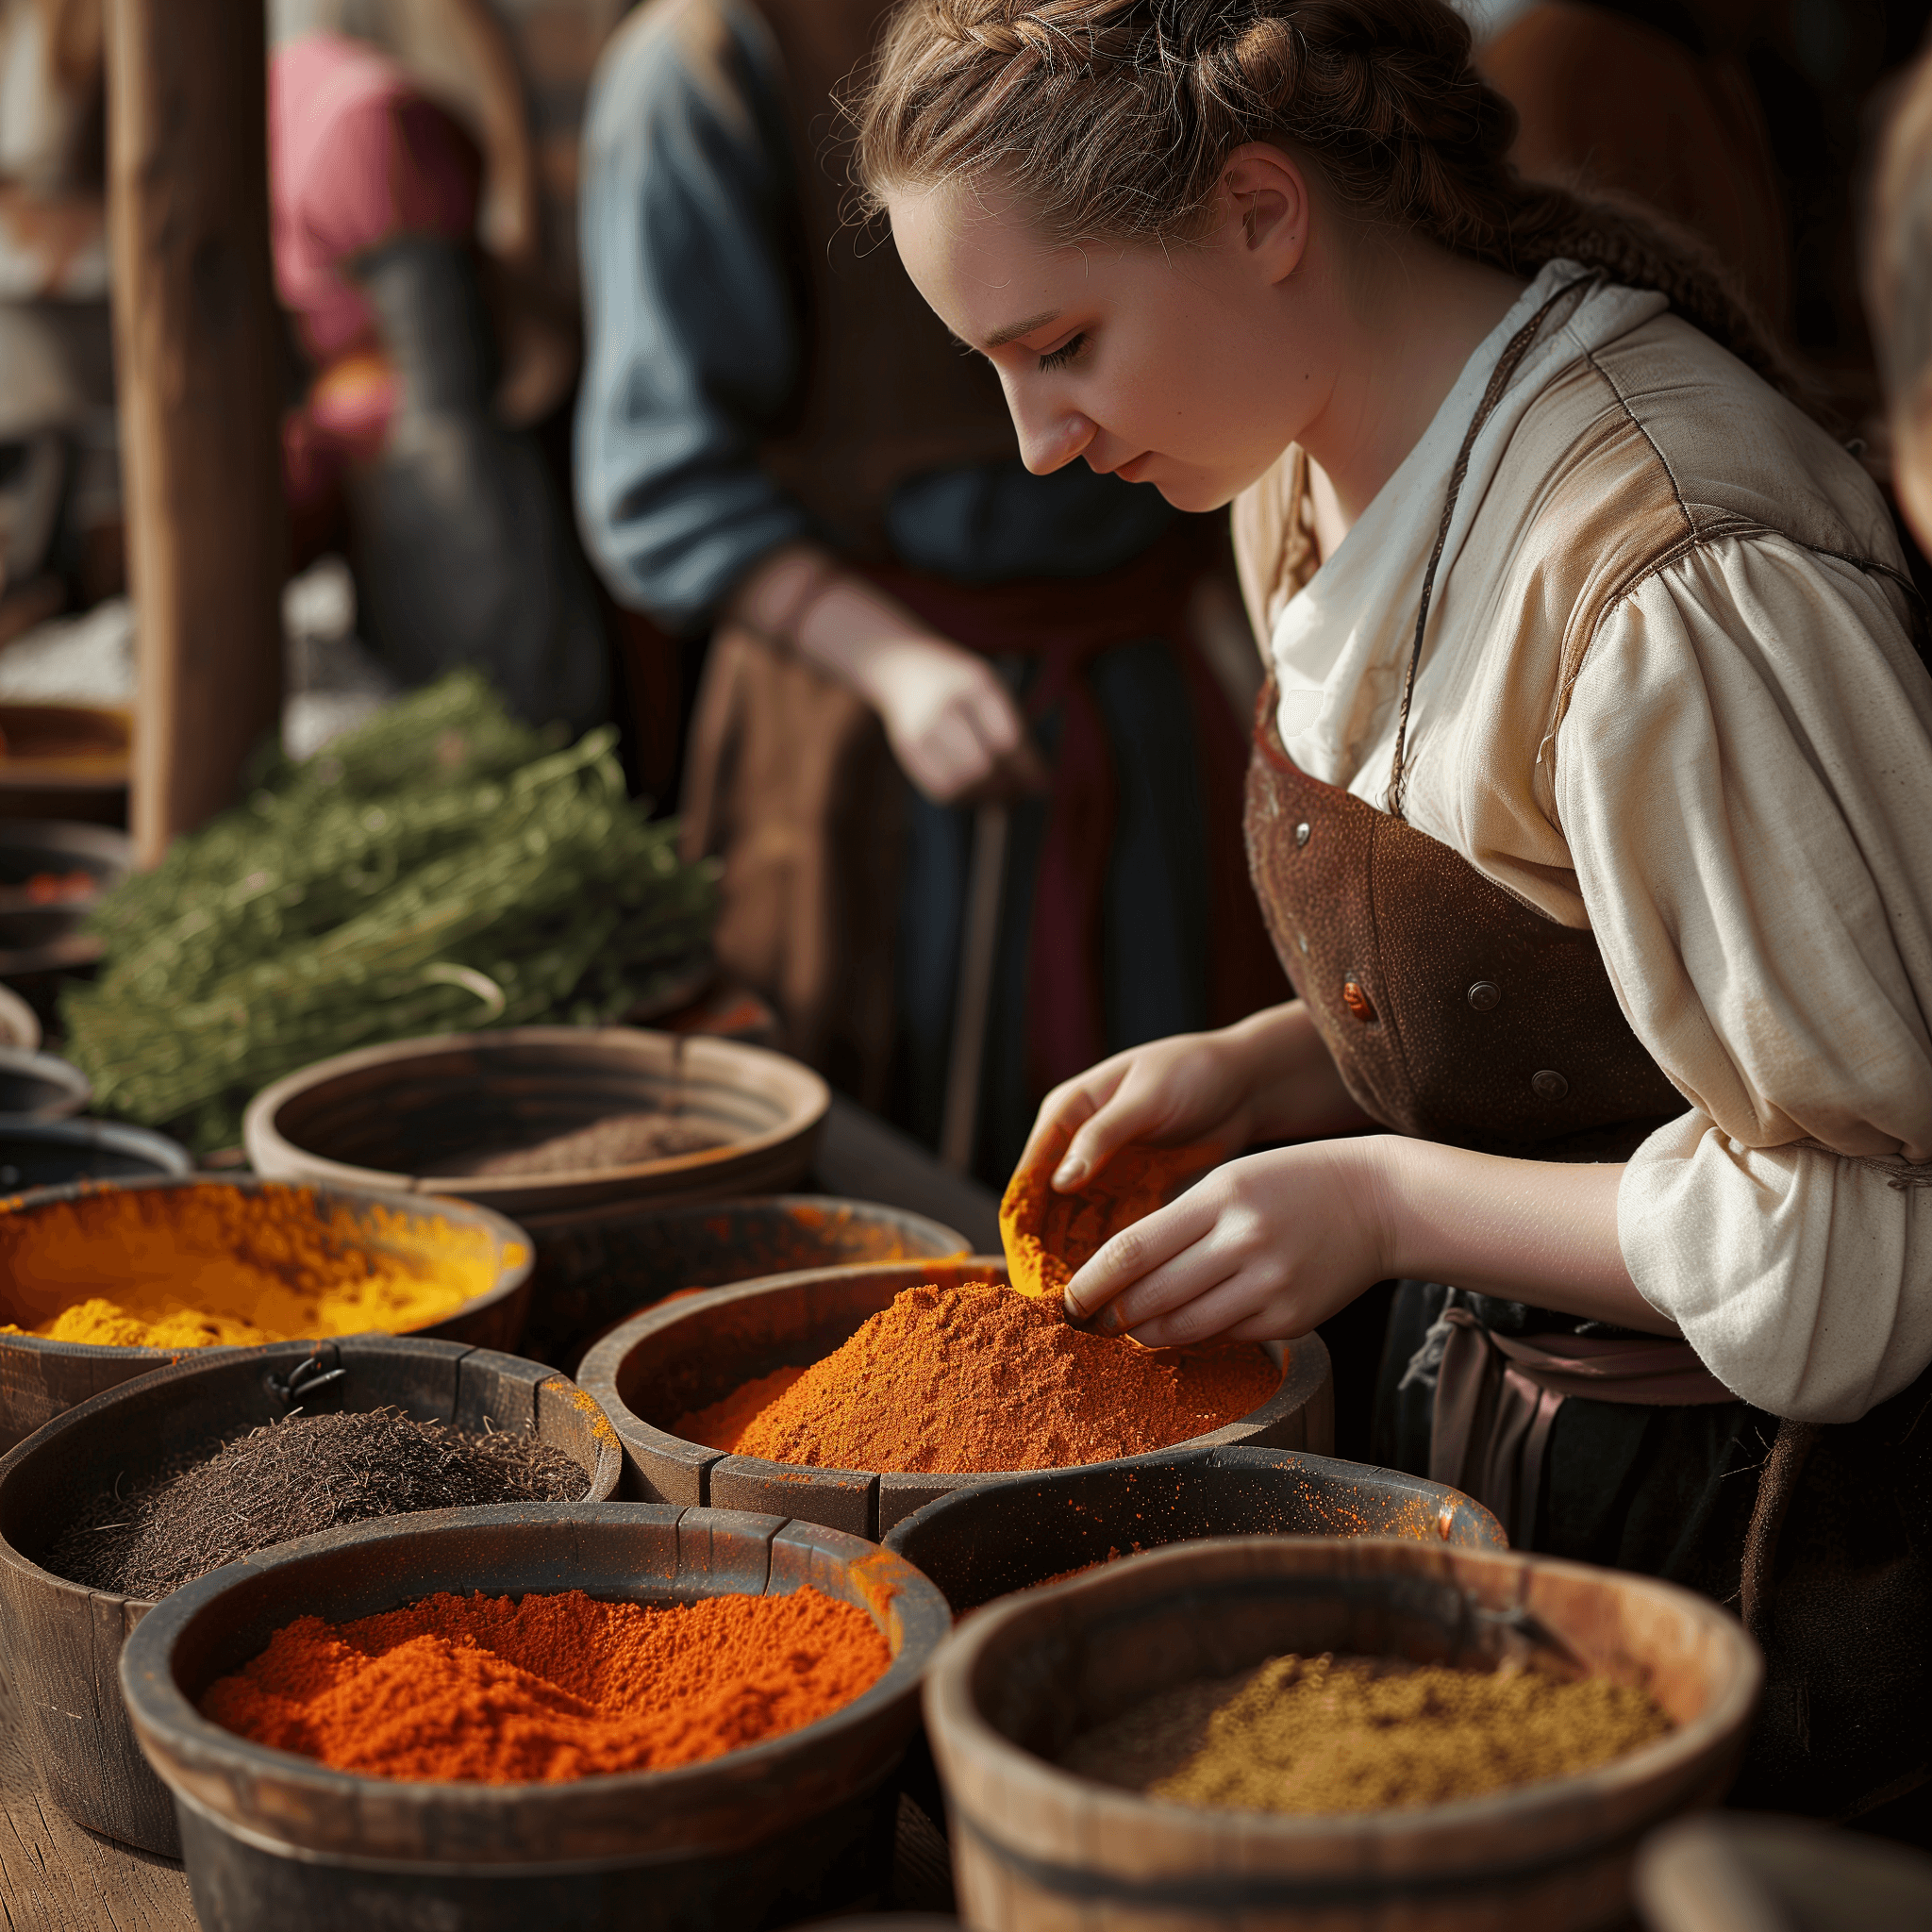 A woman inspecting high quality spices in medieval gotland